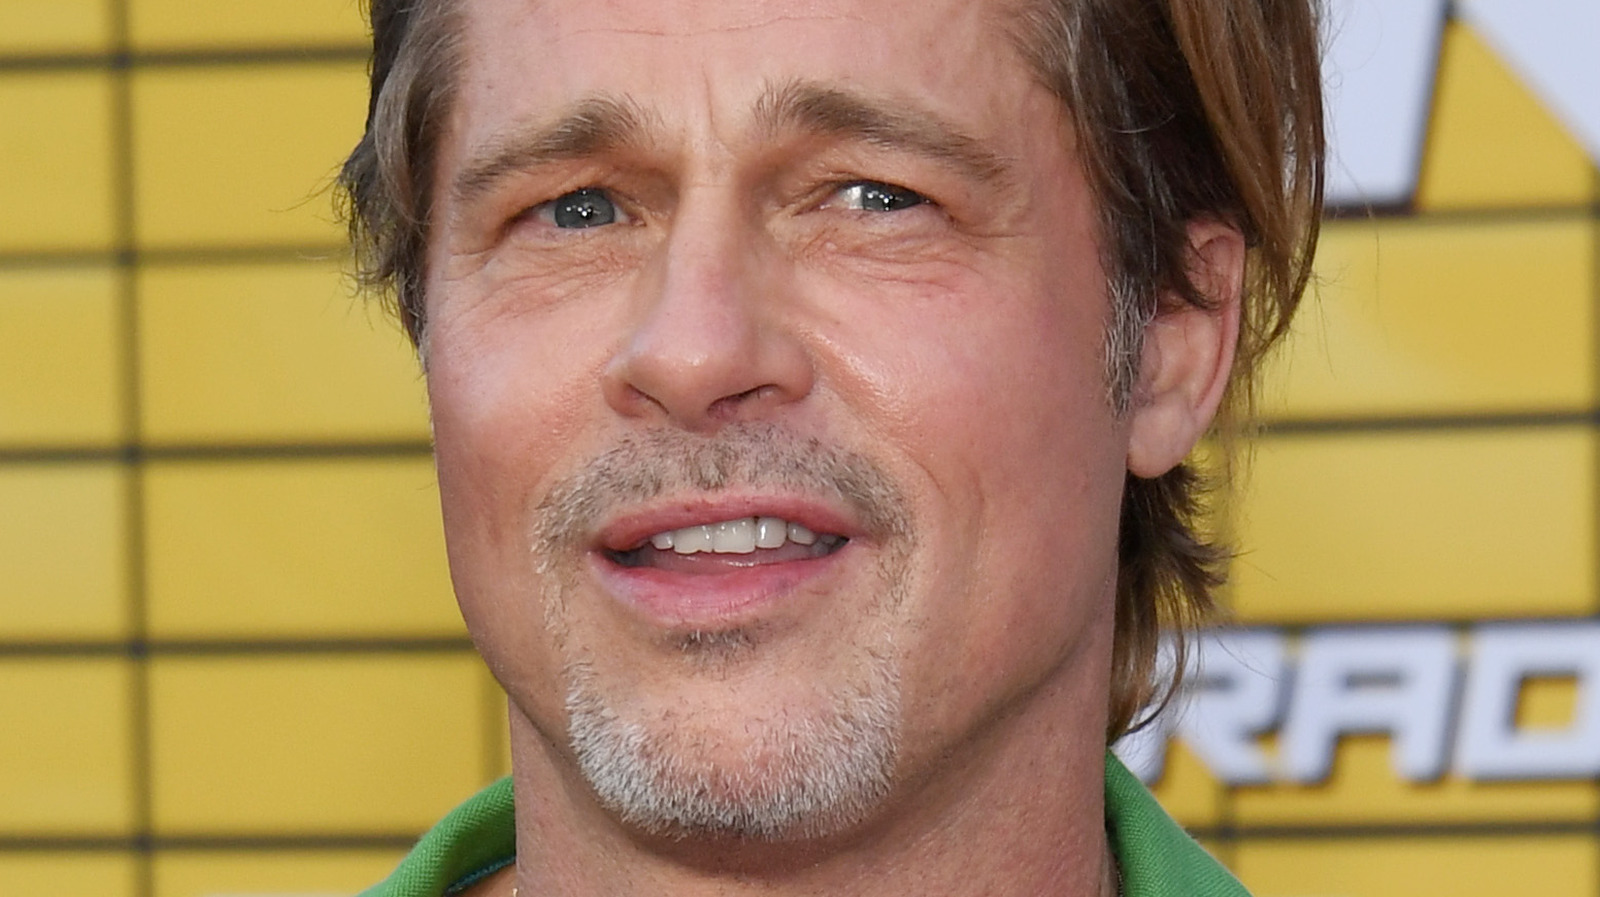 Brad Pitt's New Fashion Statement Shows His Fresh Perspective on Life